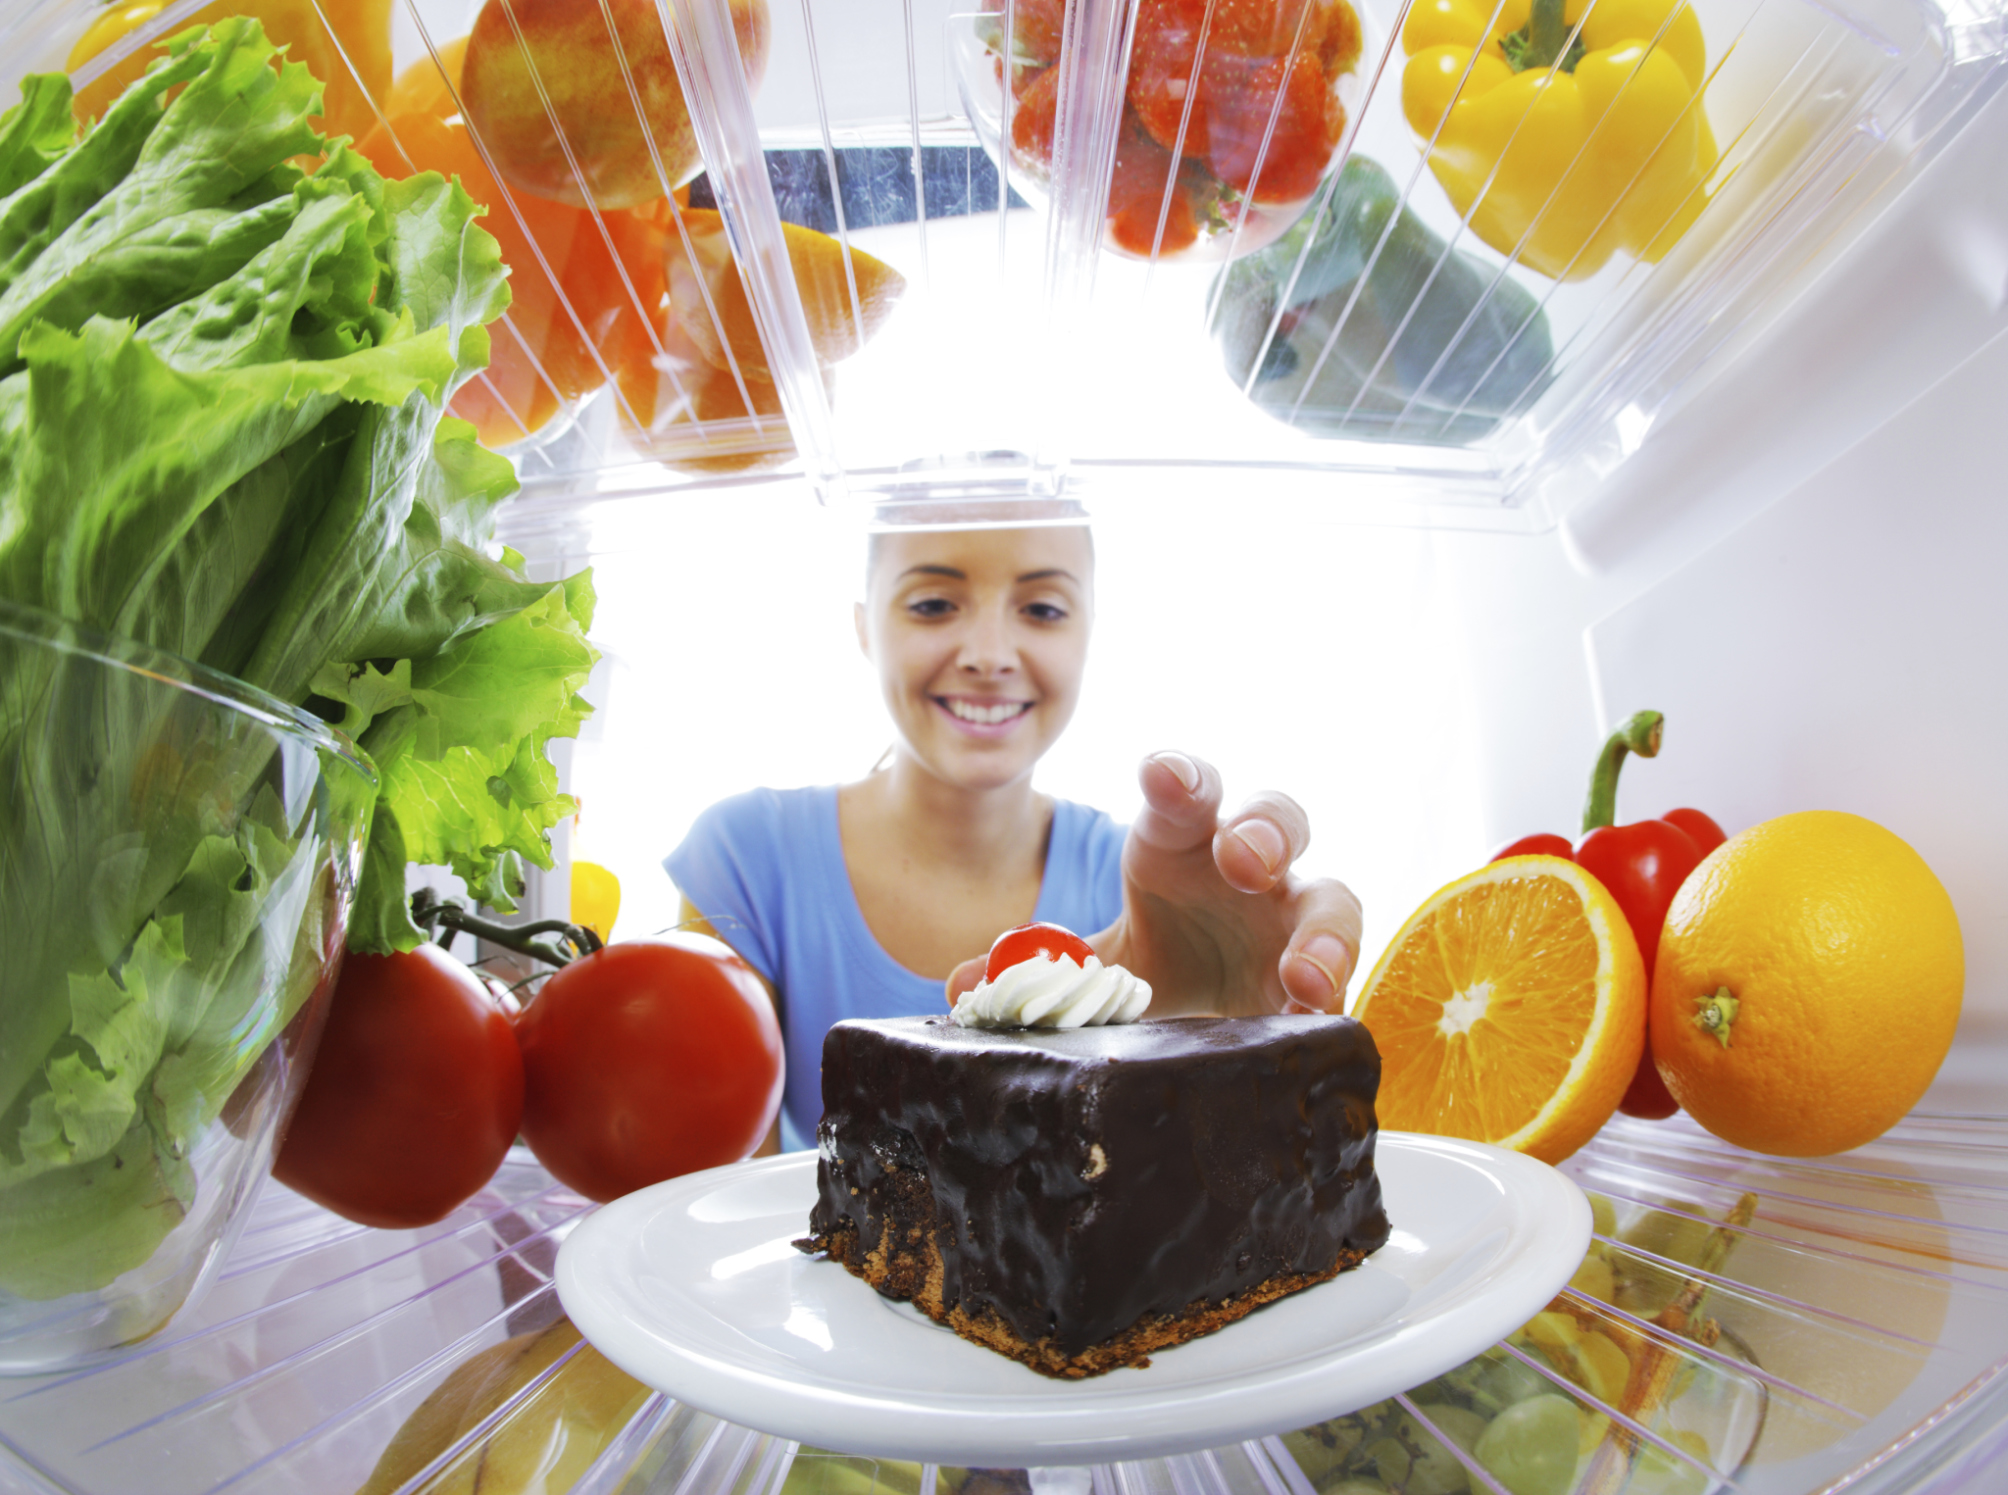 A woman smiling while reaching for a piece of chocolate cake in a fridge